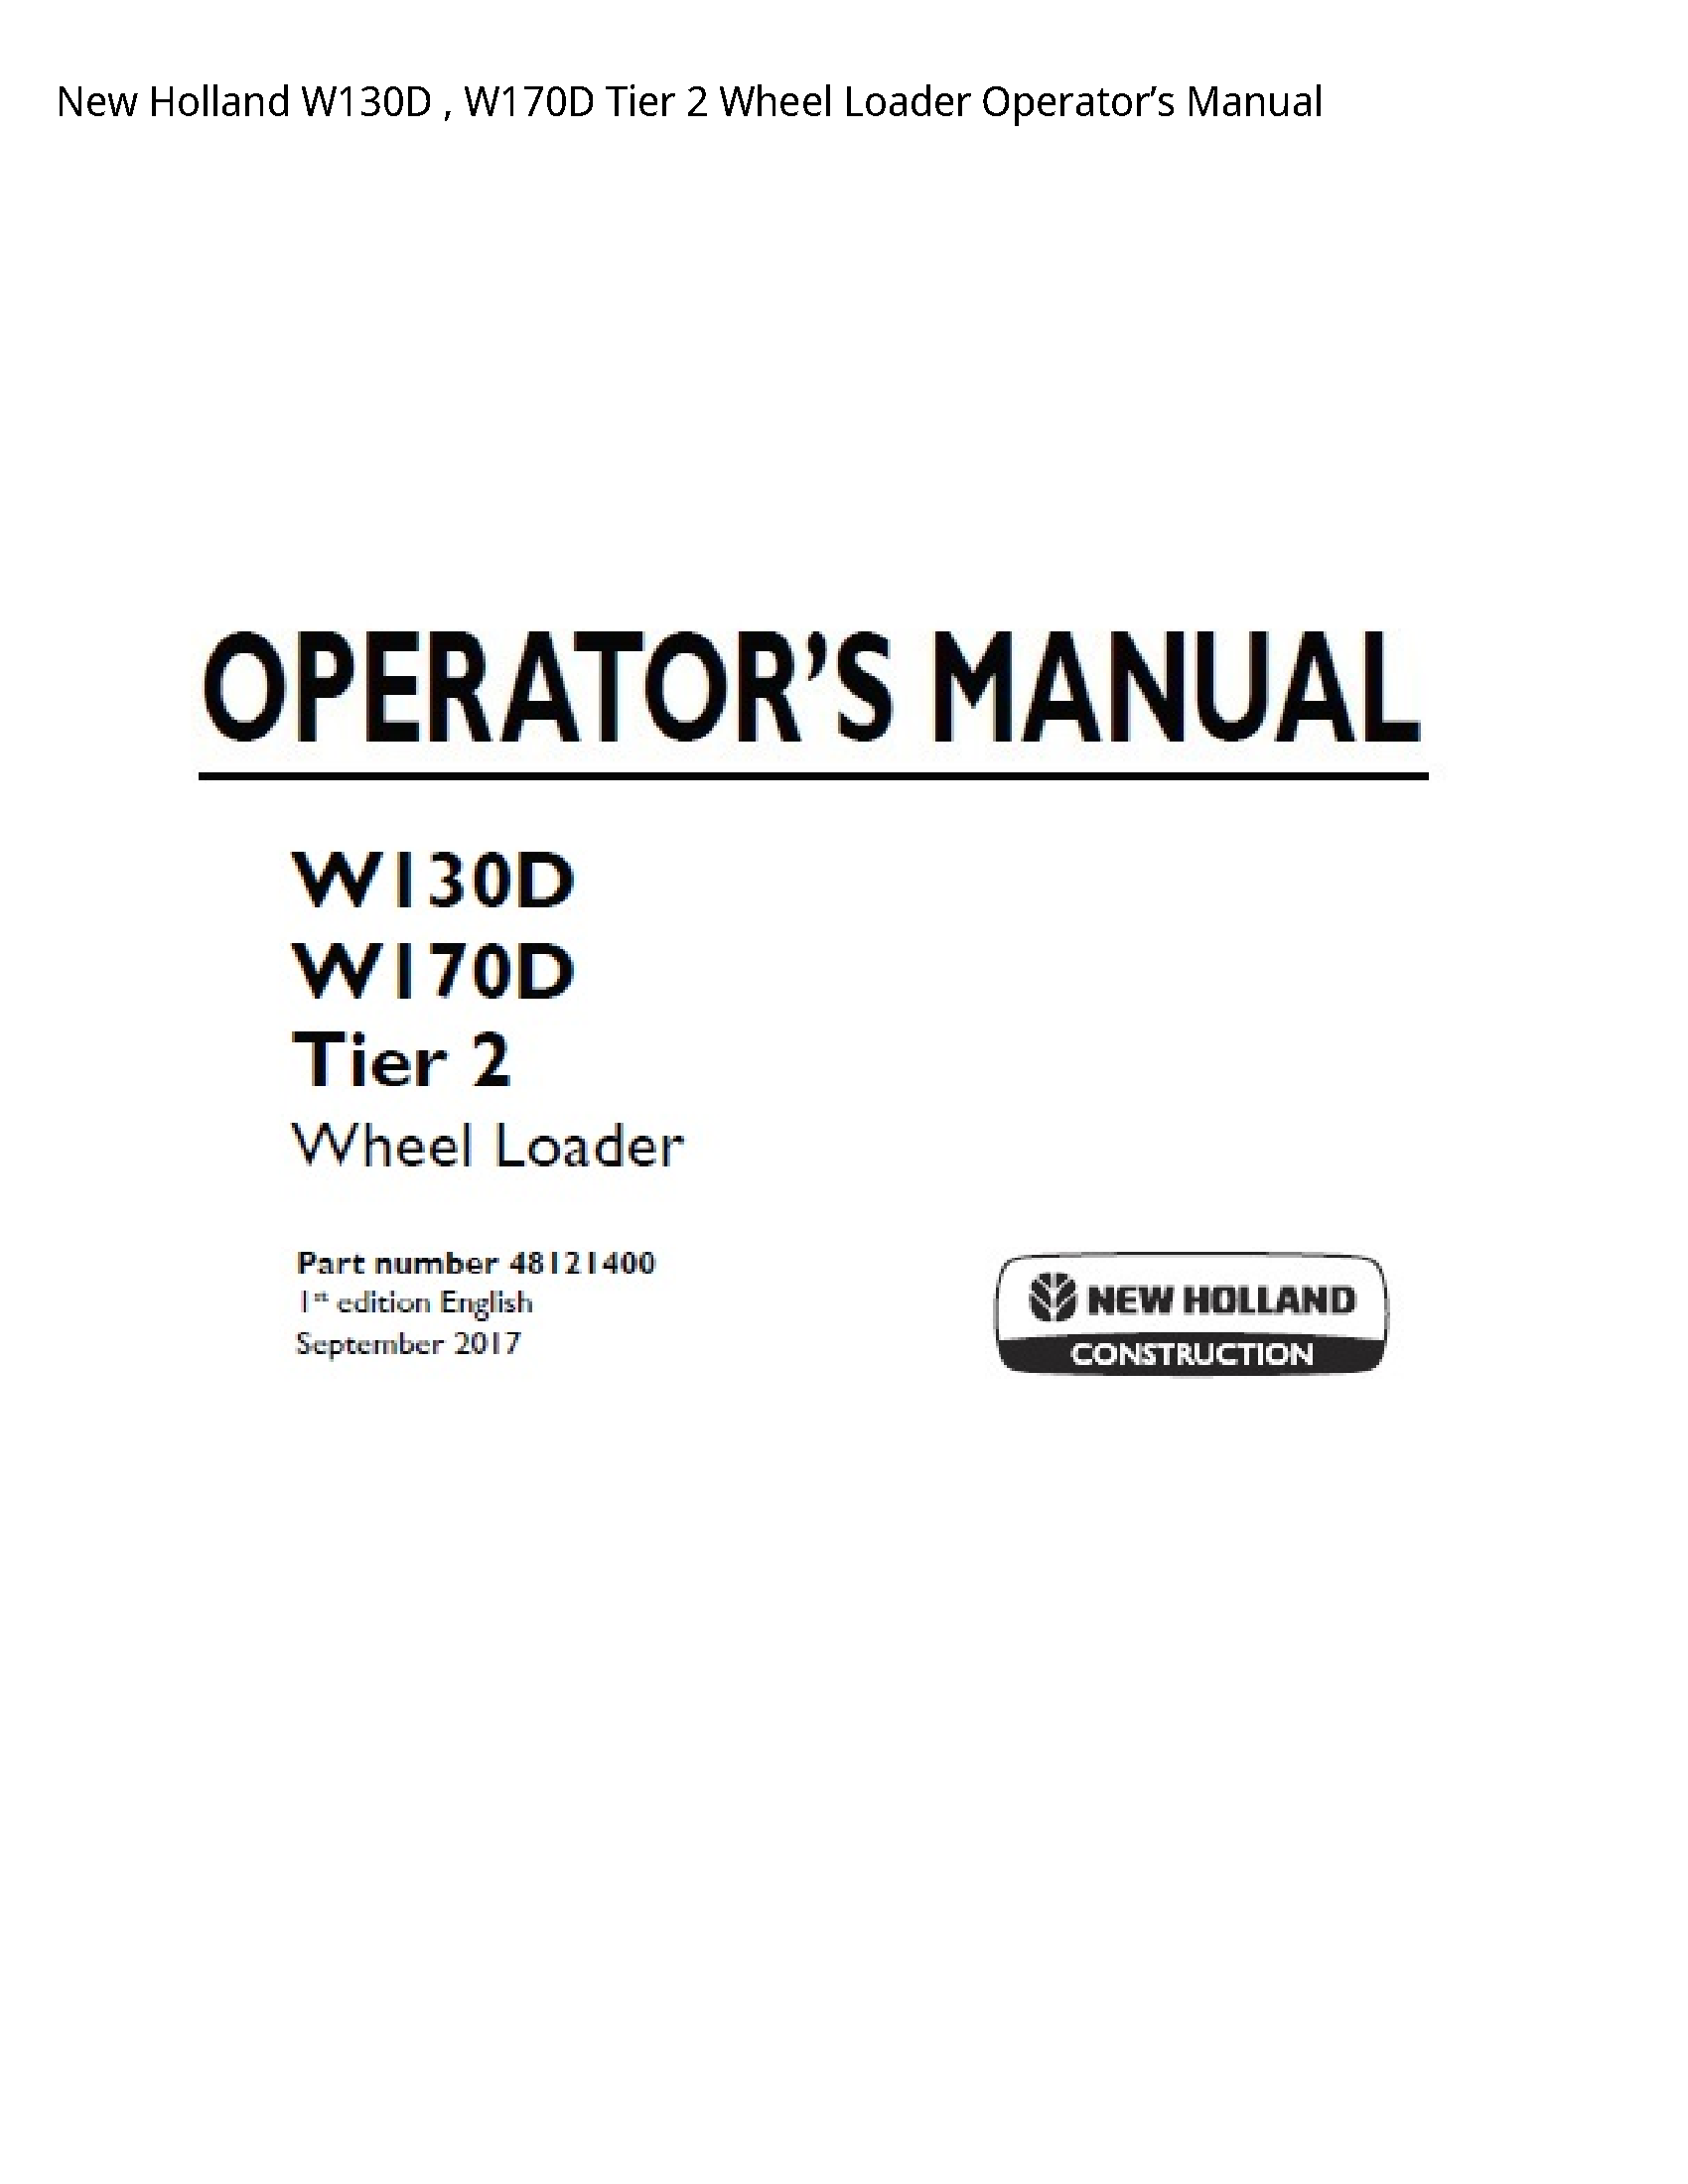 New Holland W130D Tier Wheel Loader Operator’s manual